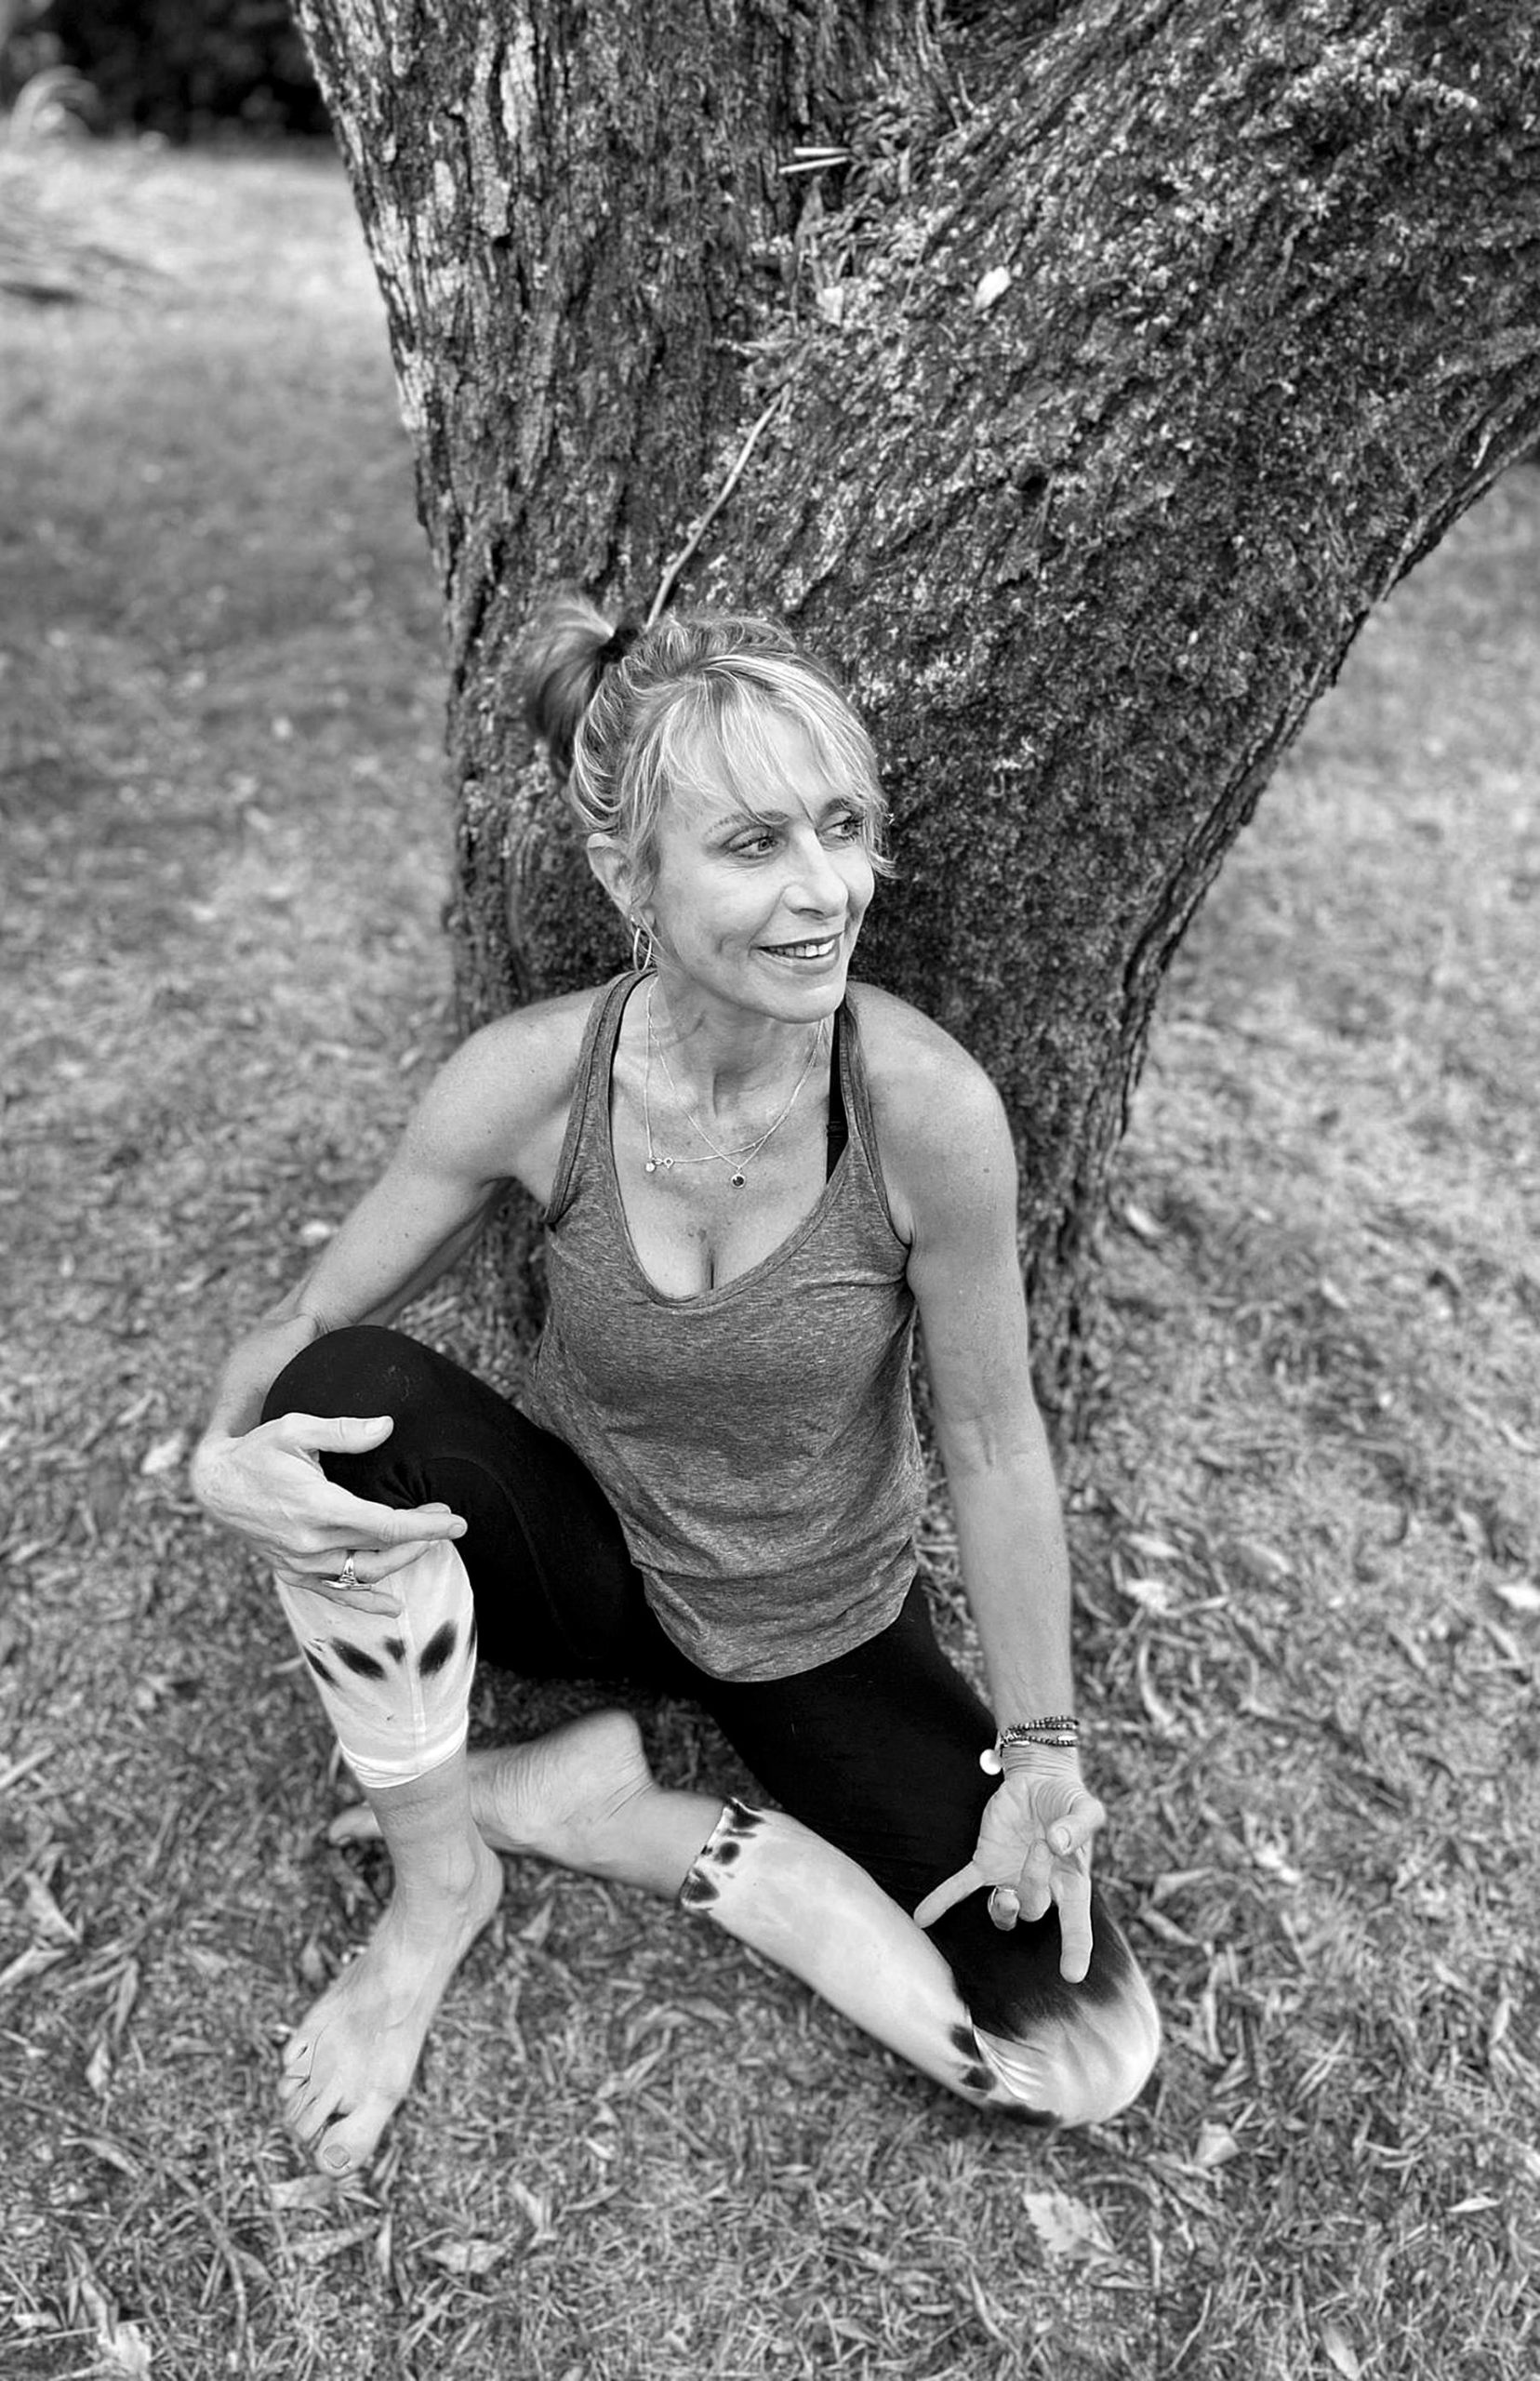 Courtesy Photo
Amanda Kelly, who will lead the yoga flow benefit on Sunday, is a writer, yogi, mother and activist. She has taught across the planet and right in her own backyard. Her monthly community classes and students support local and international mutual aid organizations.